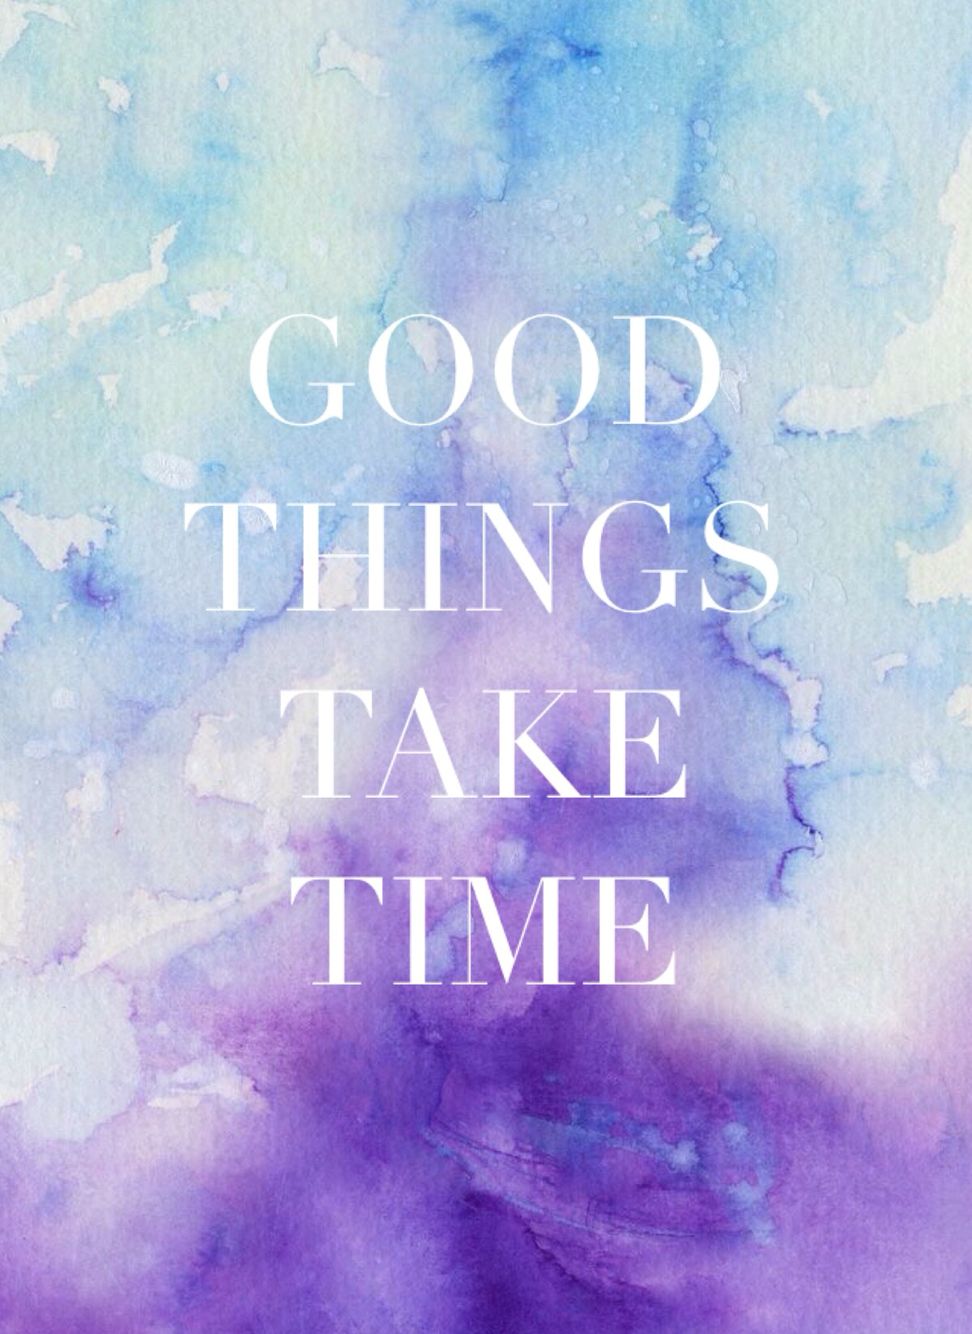 GOOD THINGS TAKE TIME iPhone quote wallpaper. Wallpaper quotes, Good things take time, Lord shiva HD wallpaper